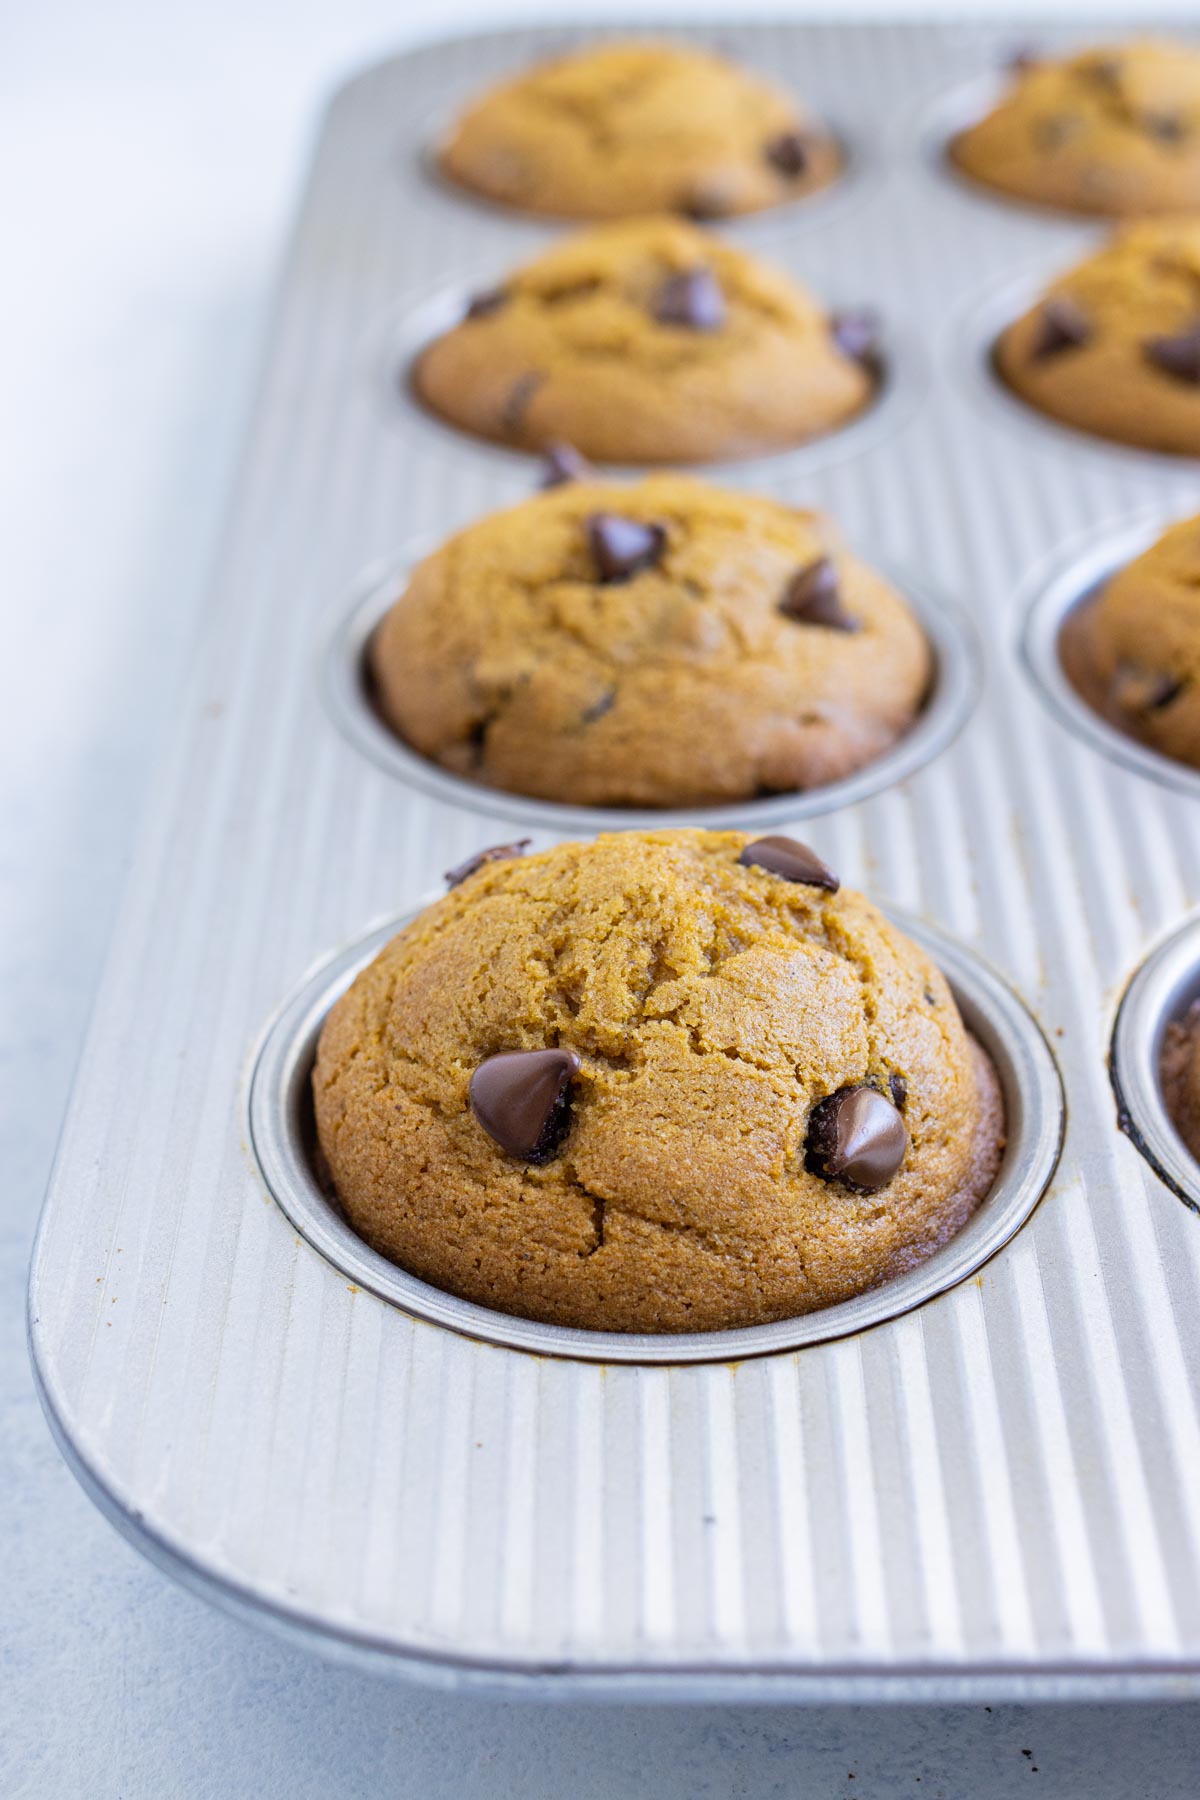 Muffins are done when the tops are rounded and they are golden in color.